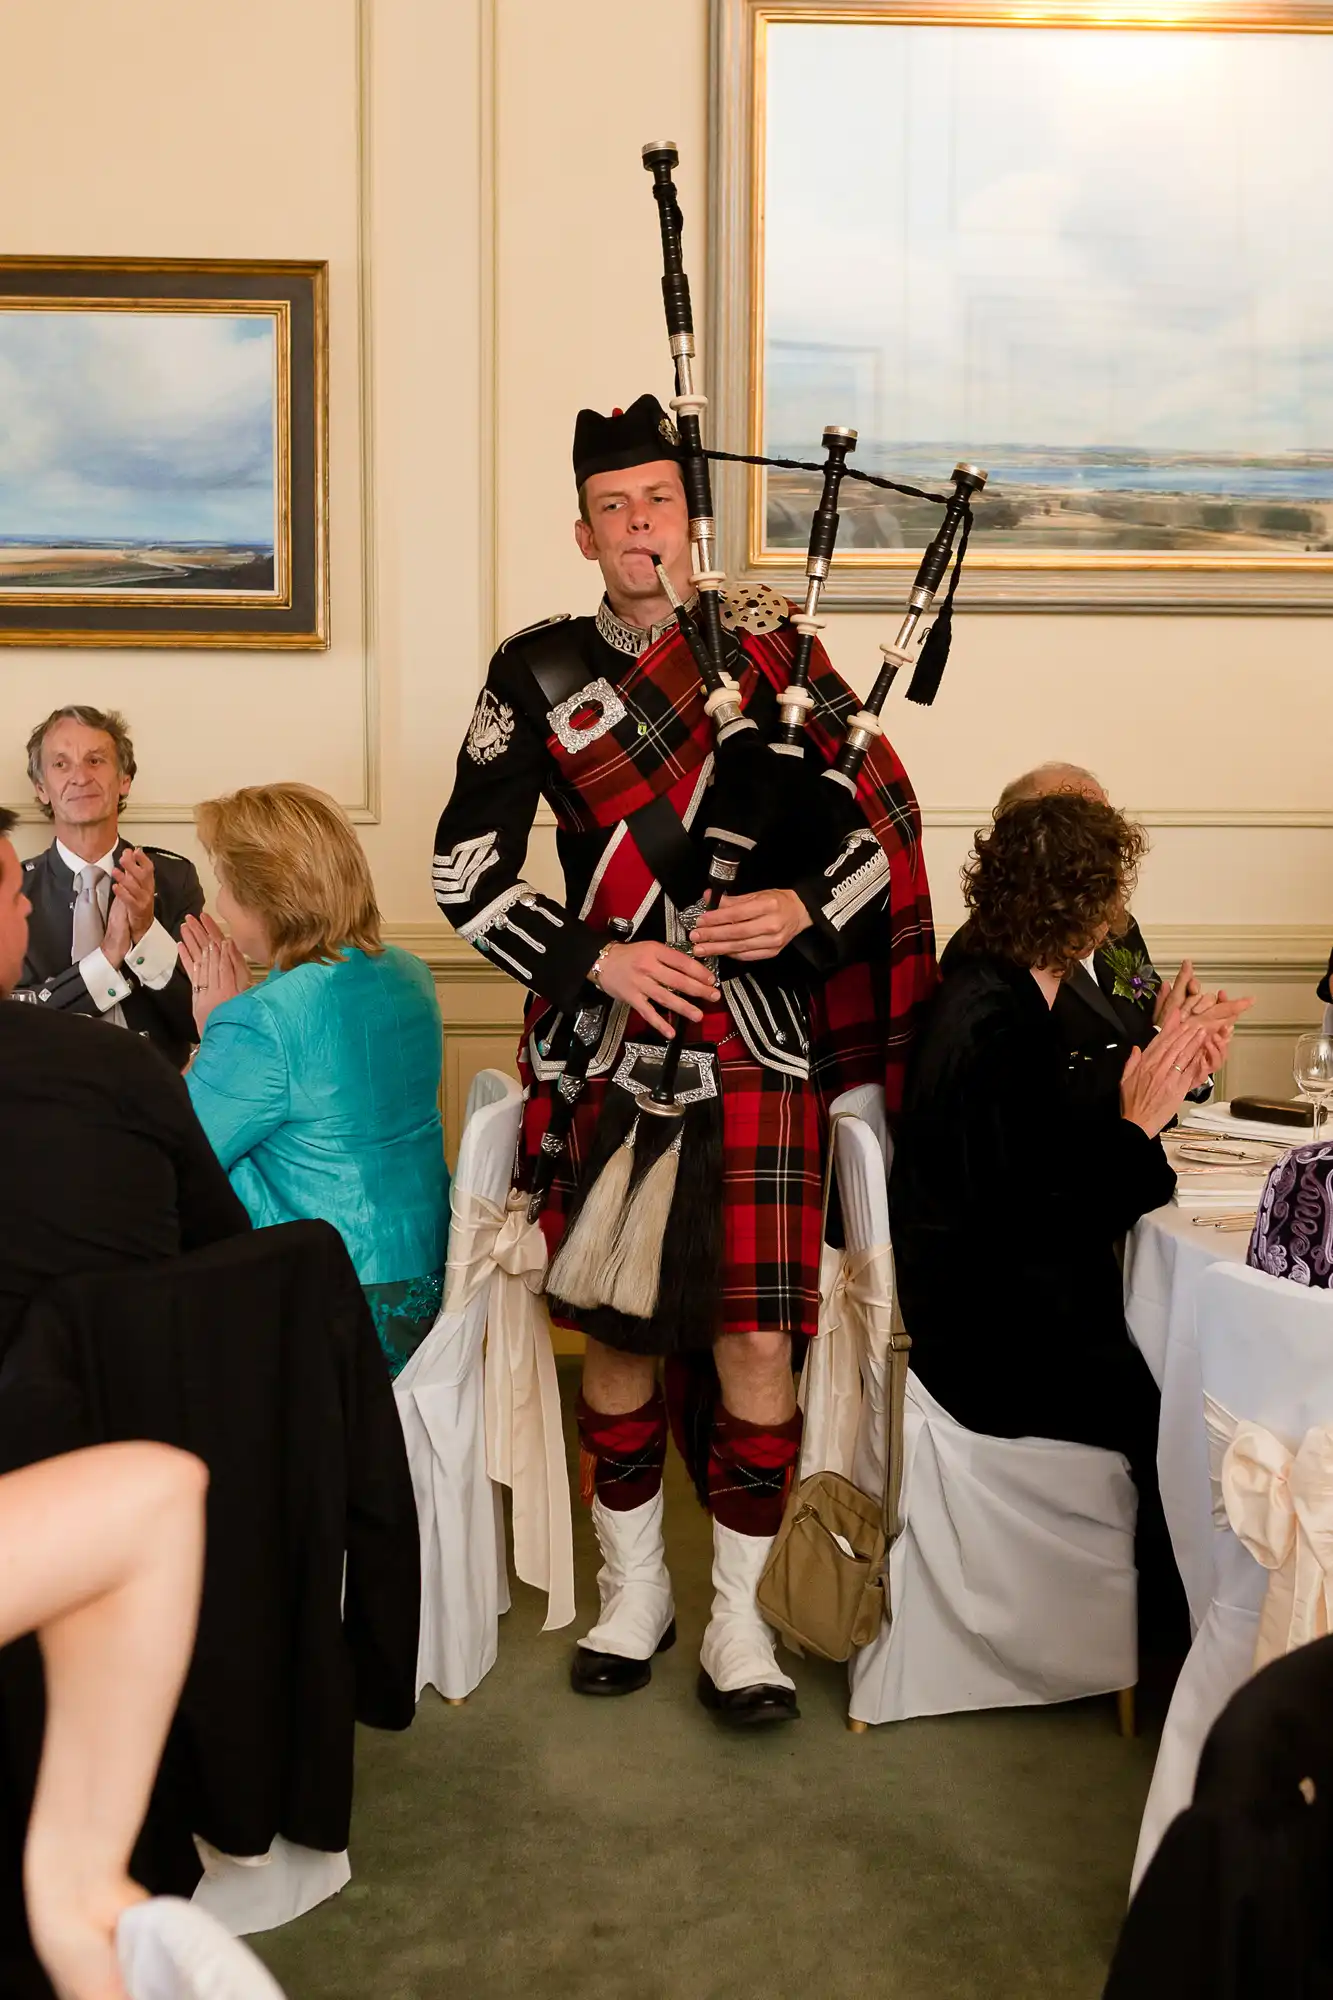 A bagpiper in traditional scottish attire playing bagpipes at an indoor event, surrounded by seated applauding guests.